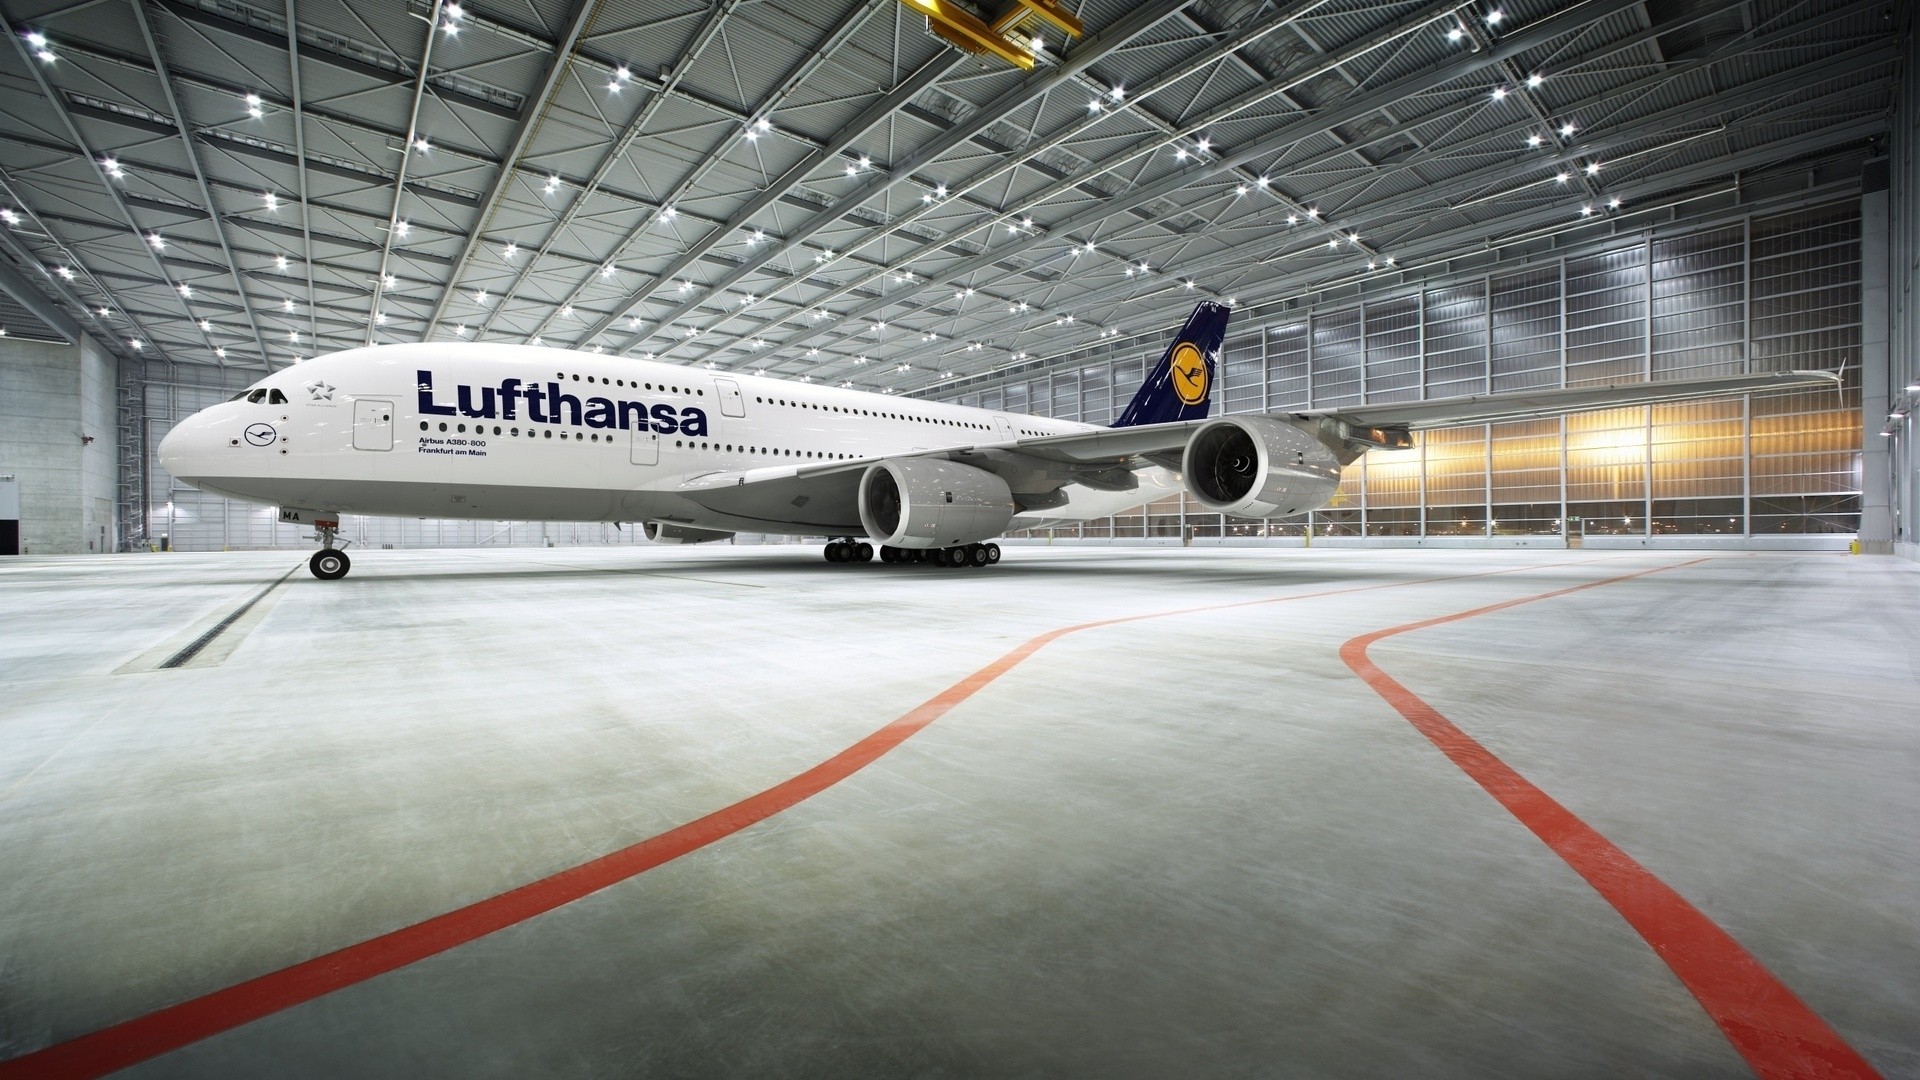 General 1920x1080 airplane Airbus Airbus A380 Lufthansa hangar vehicle airline Germany french aircraft